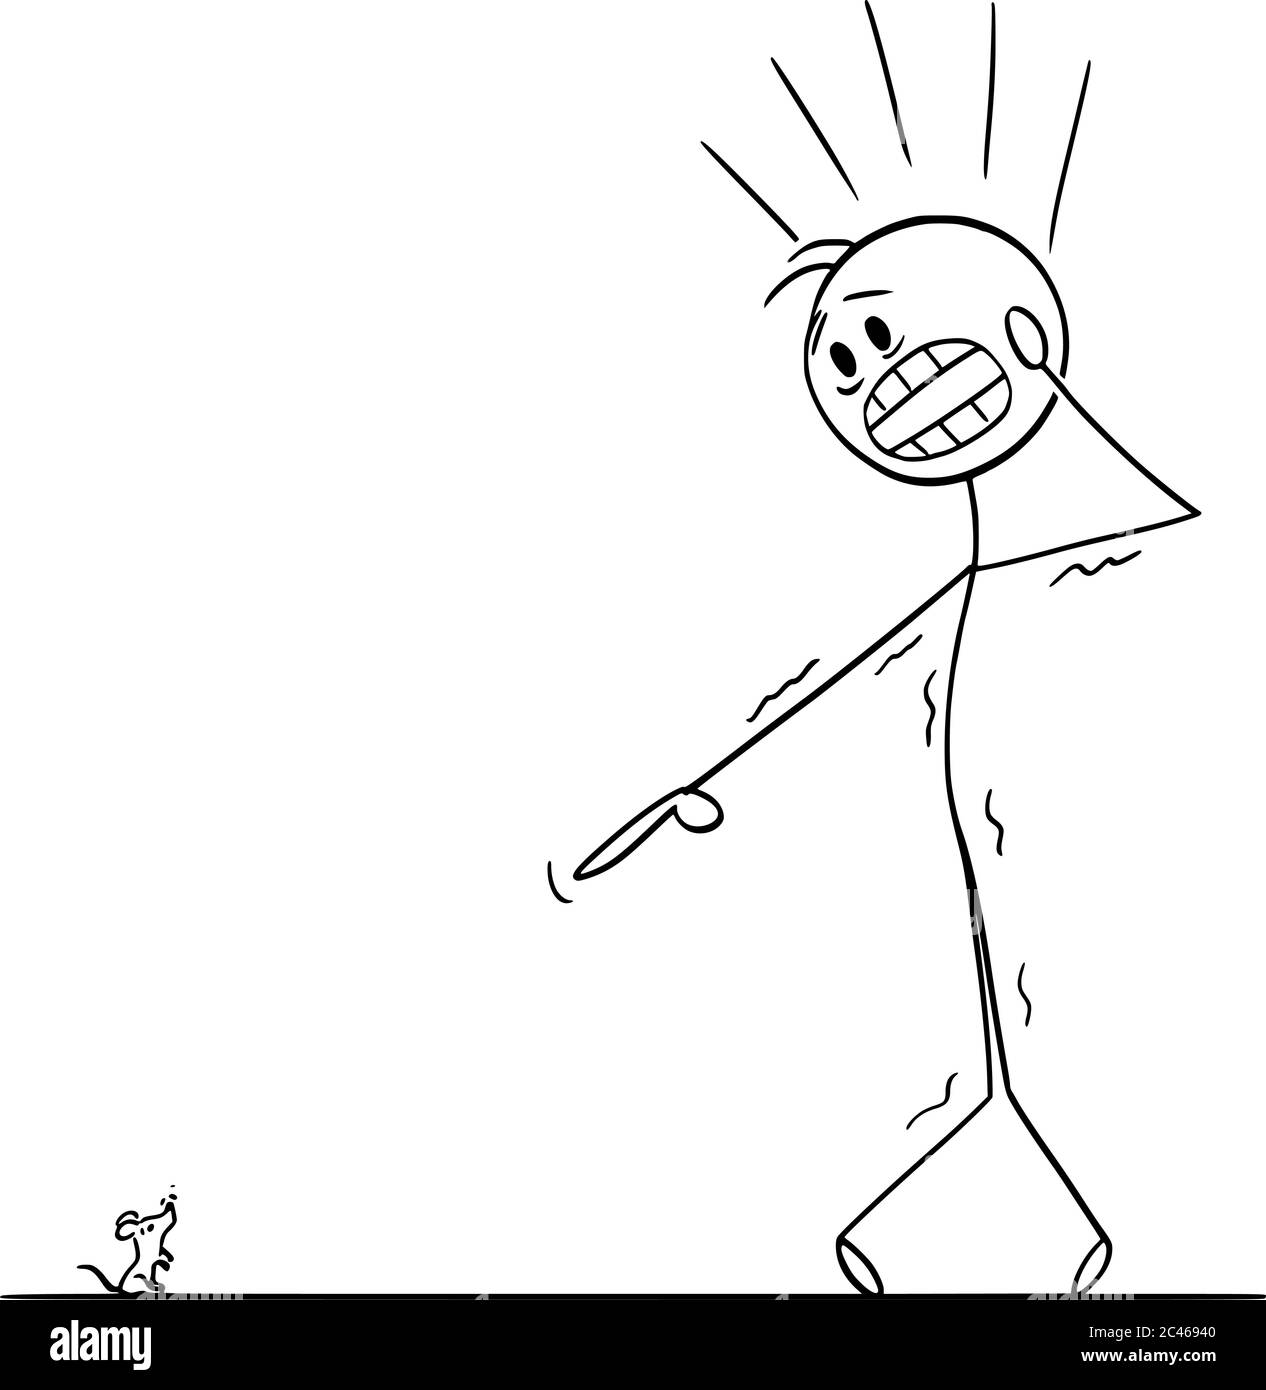 Cartoon stick man drawing illustration of frightened and scared